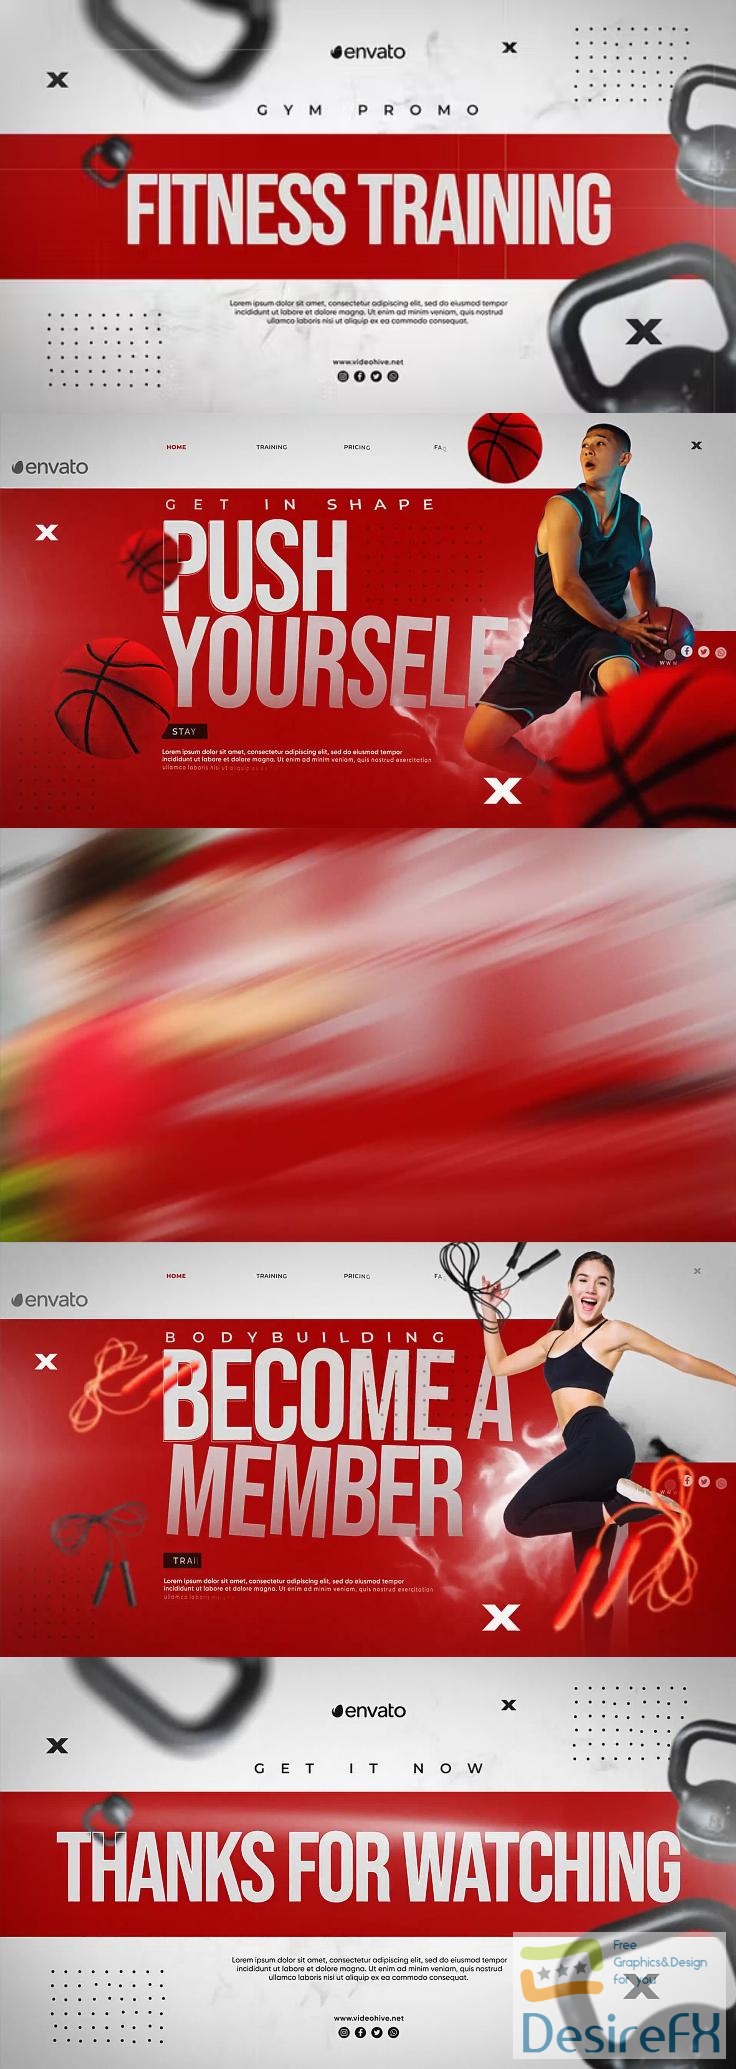 Videohive - Fitness Training Gym Promo - 38535525